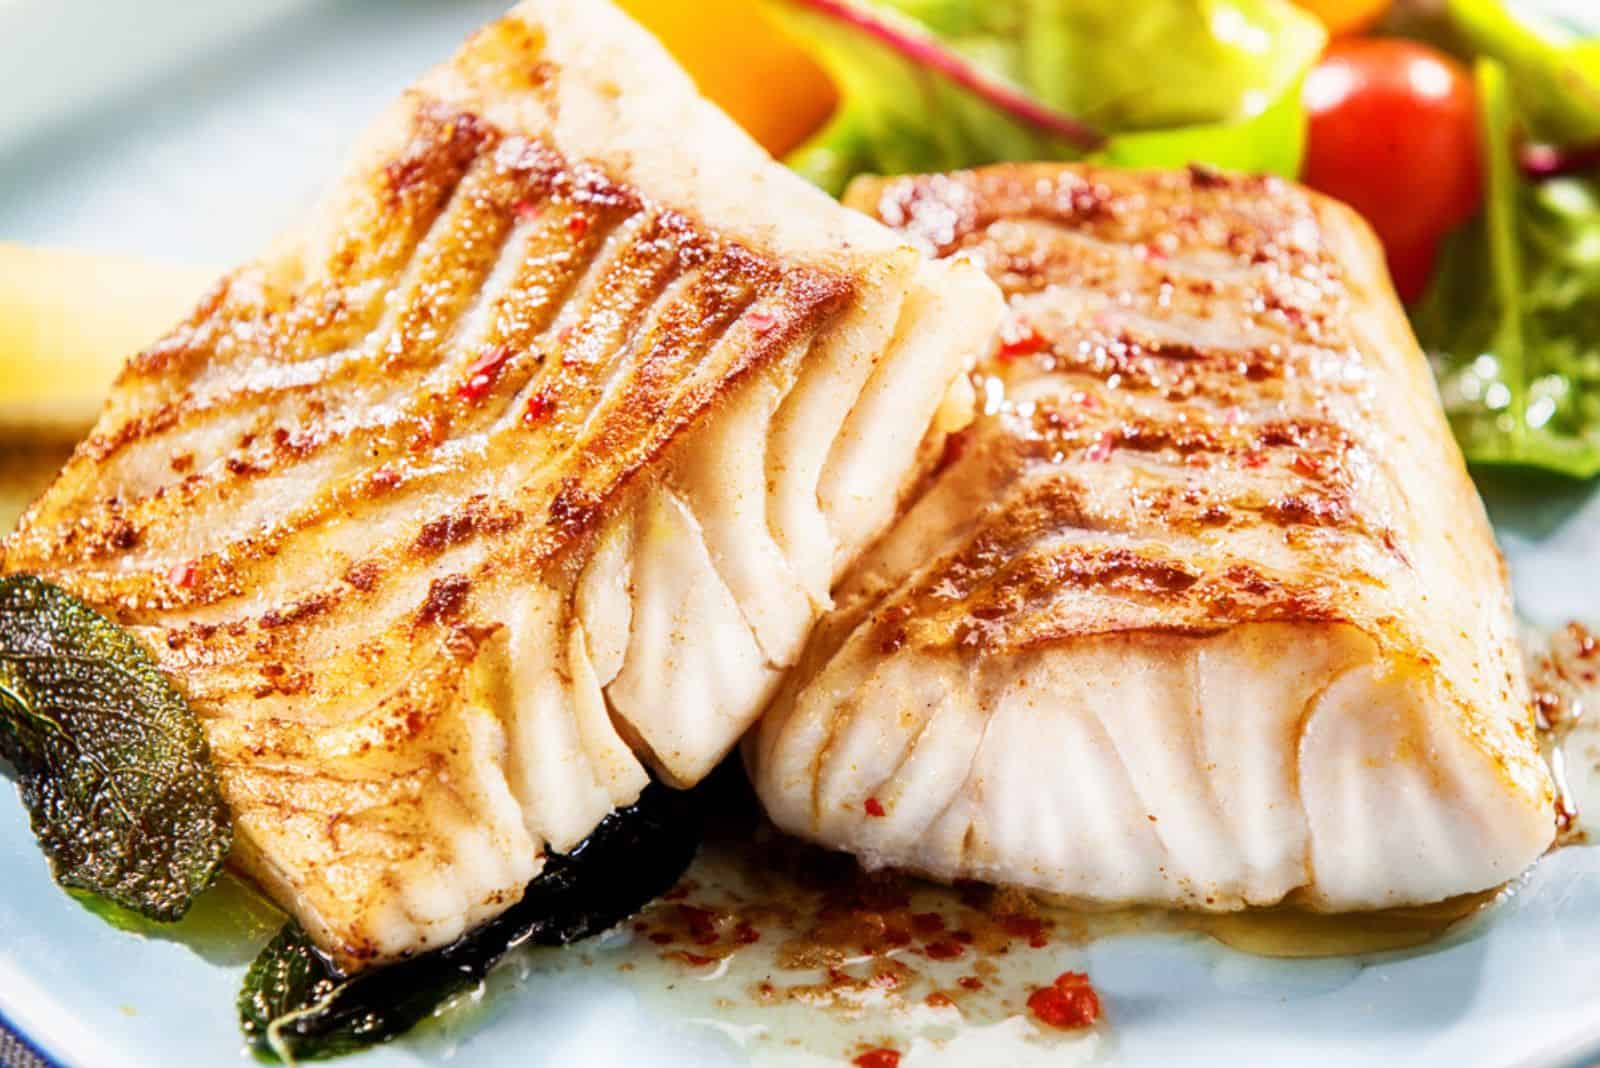 fillets of marinated grilled or oven baked pollock or coalfish served with a fresh salad